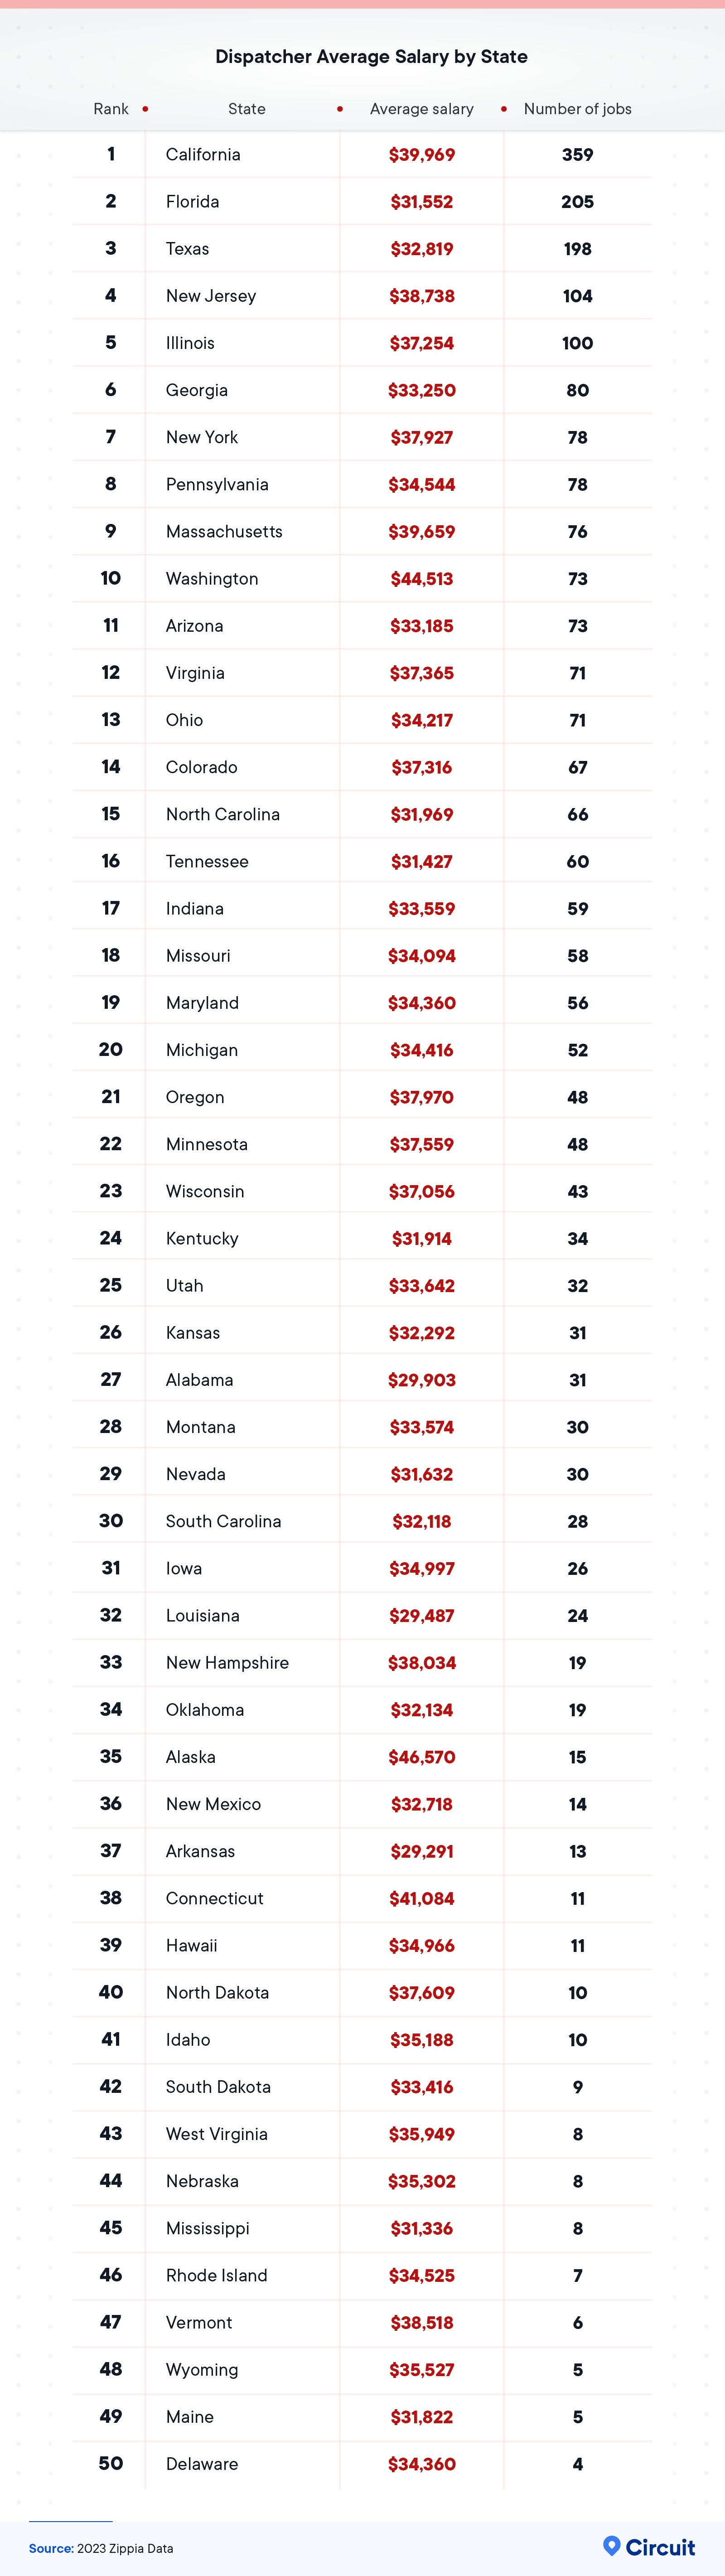 Dispatcher average salary by state